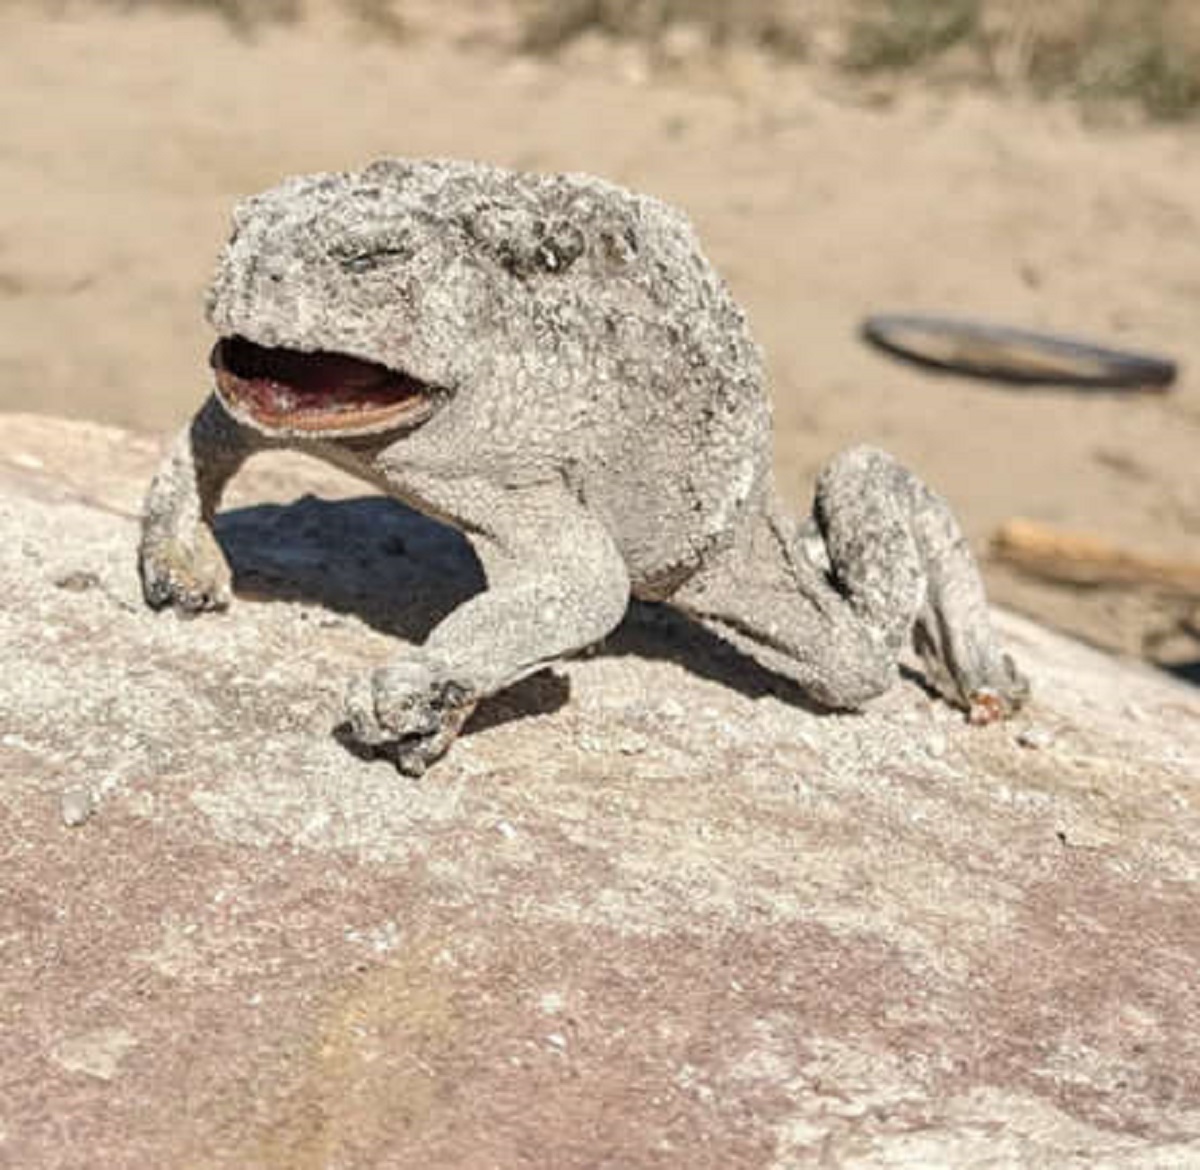 A toad fell in the fire? “This toad jumped in my campfire and got carbonized overnight.”